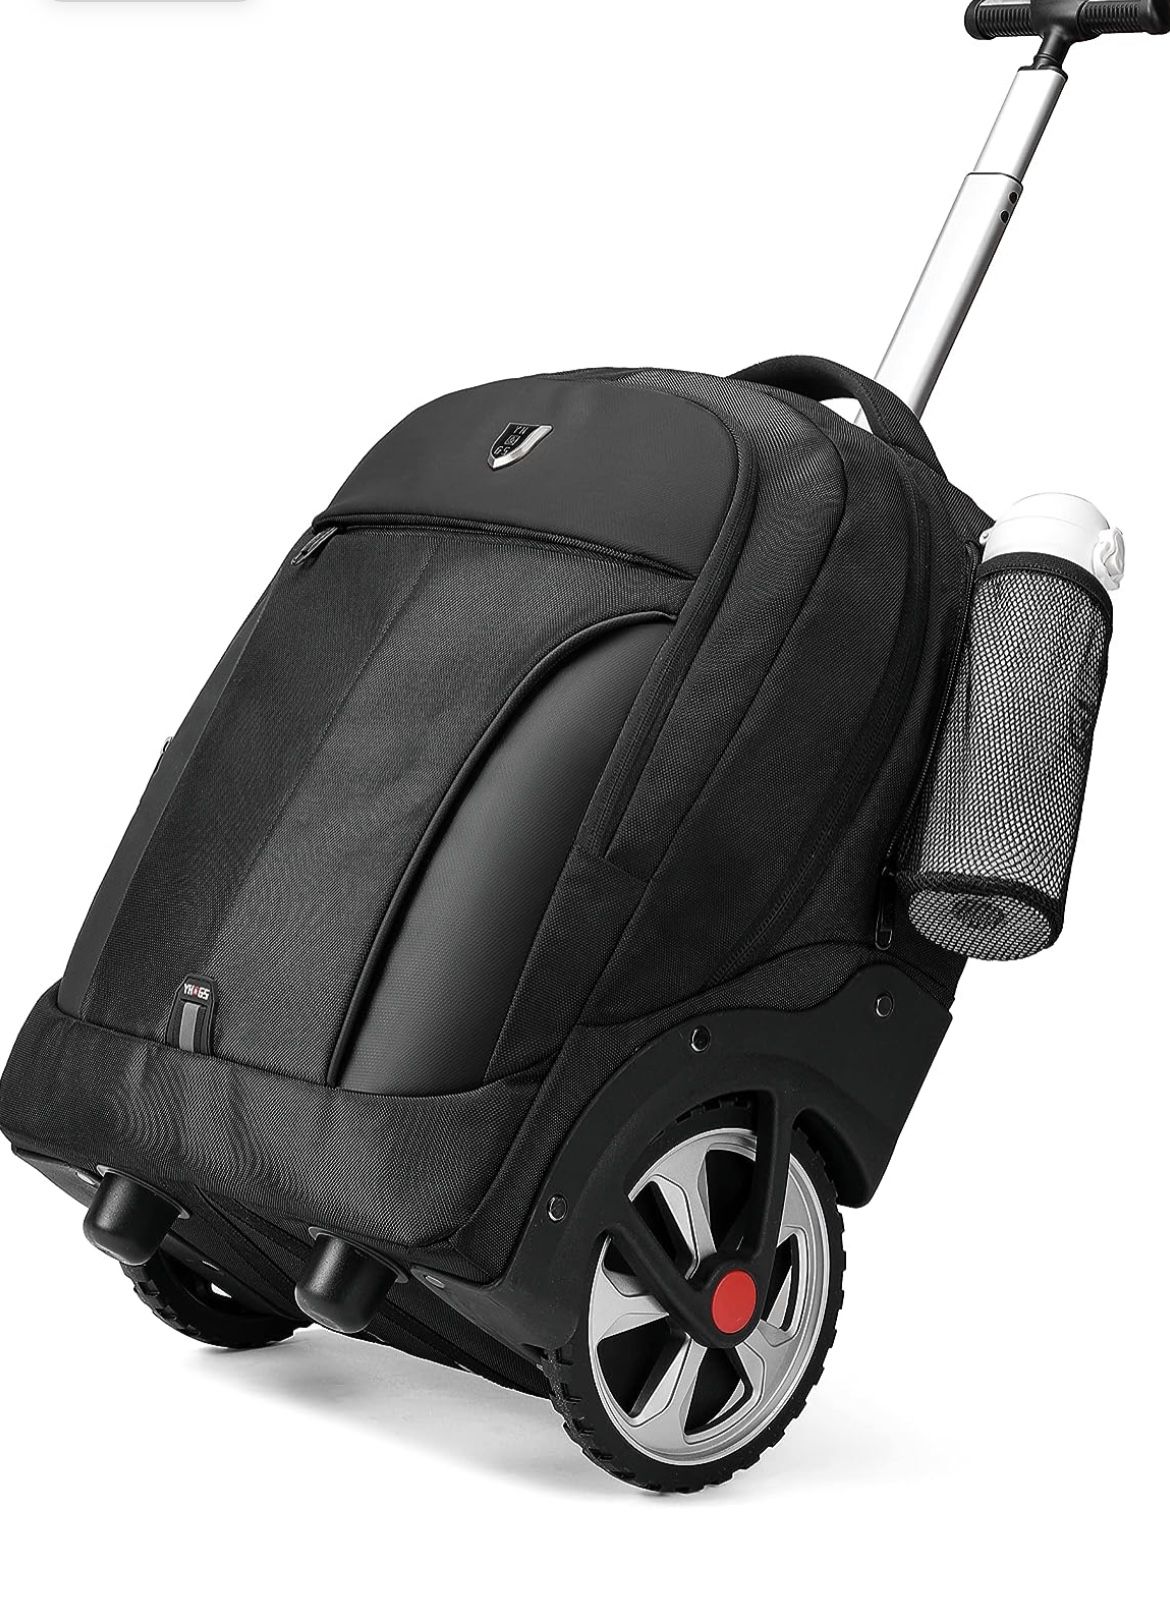 Rolling backpack, waterproof backpack with wheels for business, university students and travelers